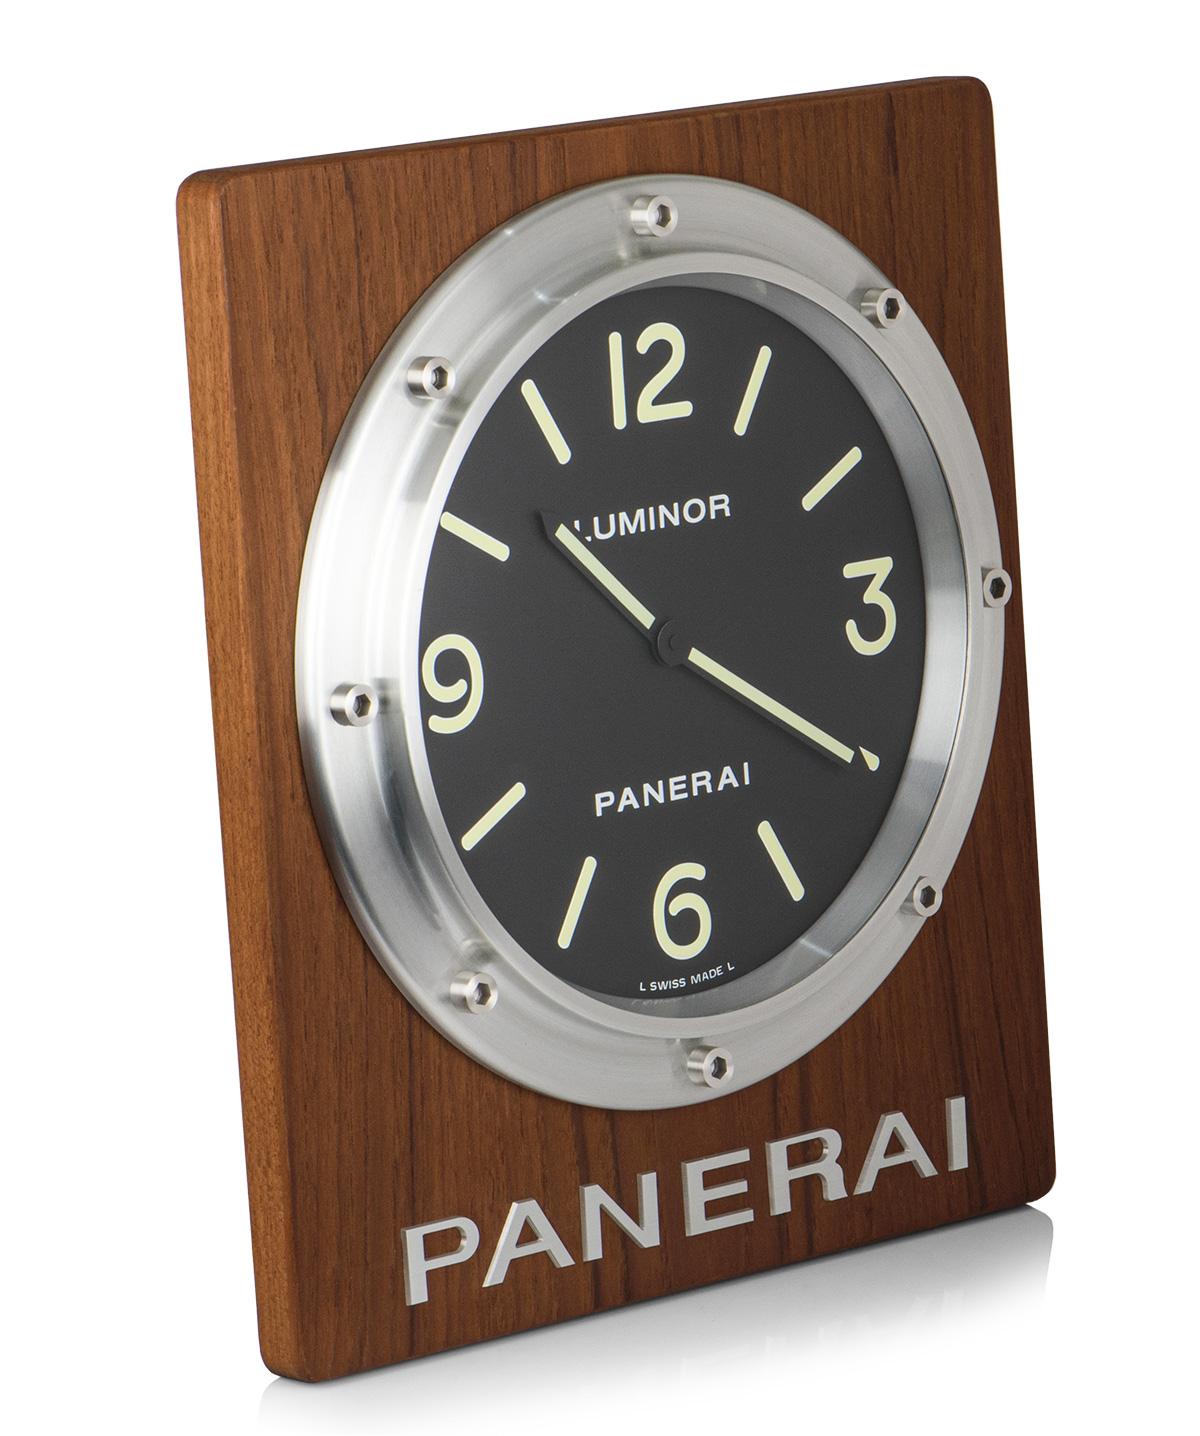 A 290 mm Aluminium & Wood Wall Clock, black dial with hour markers and arabic numbers 3,6, 9 and 12, a fixed aluminium bezel, a solid wooden case, plastic glass, quartz movement, in excellent condition, comes complete with a Panerai box and Undated